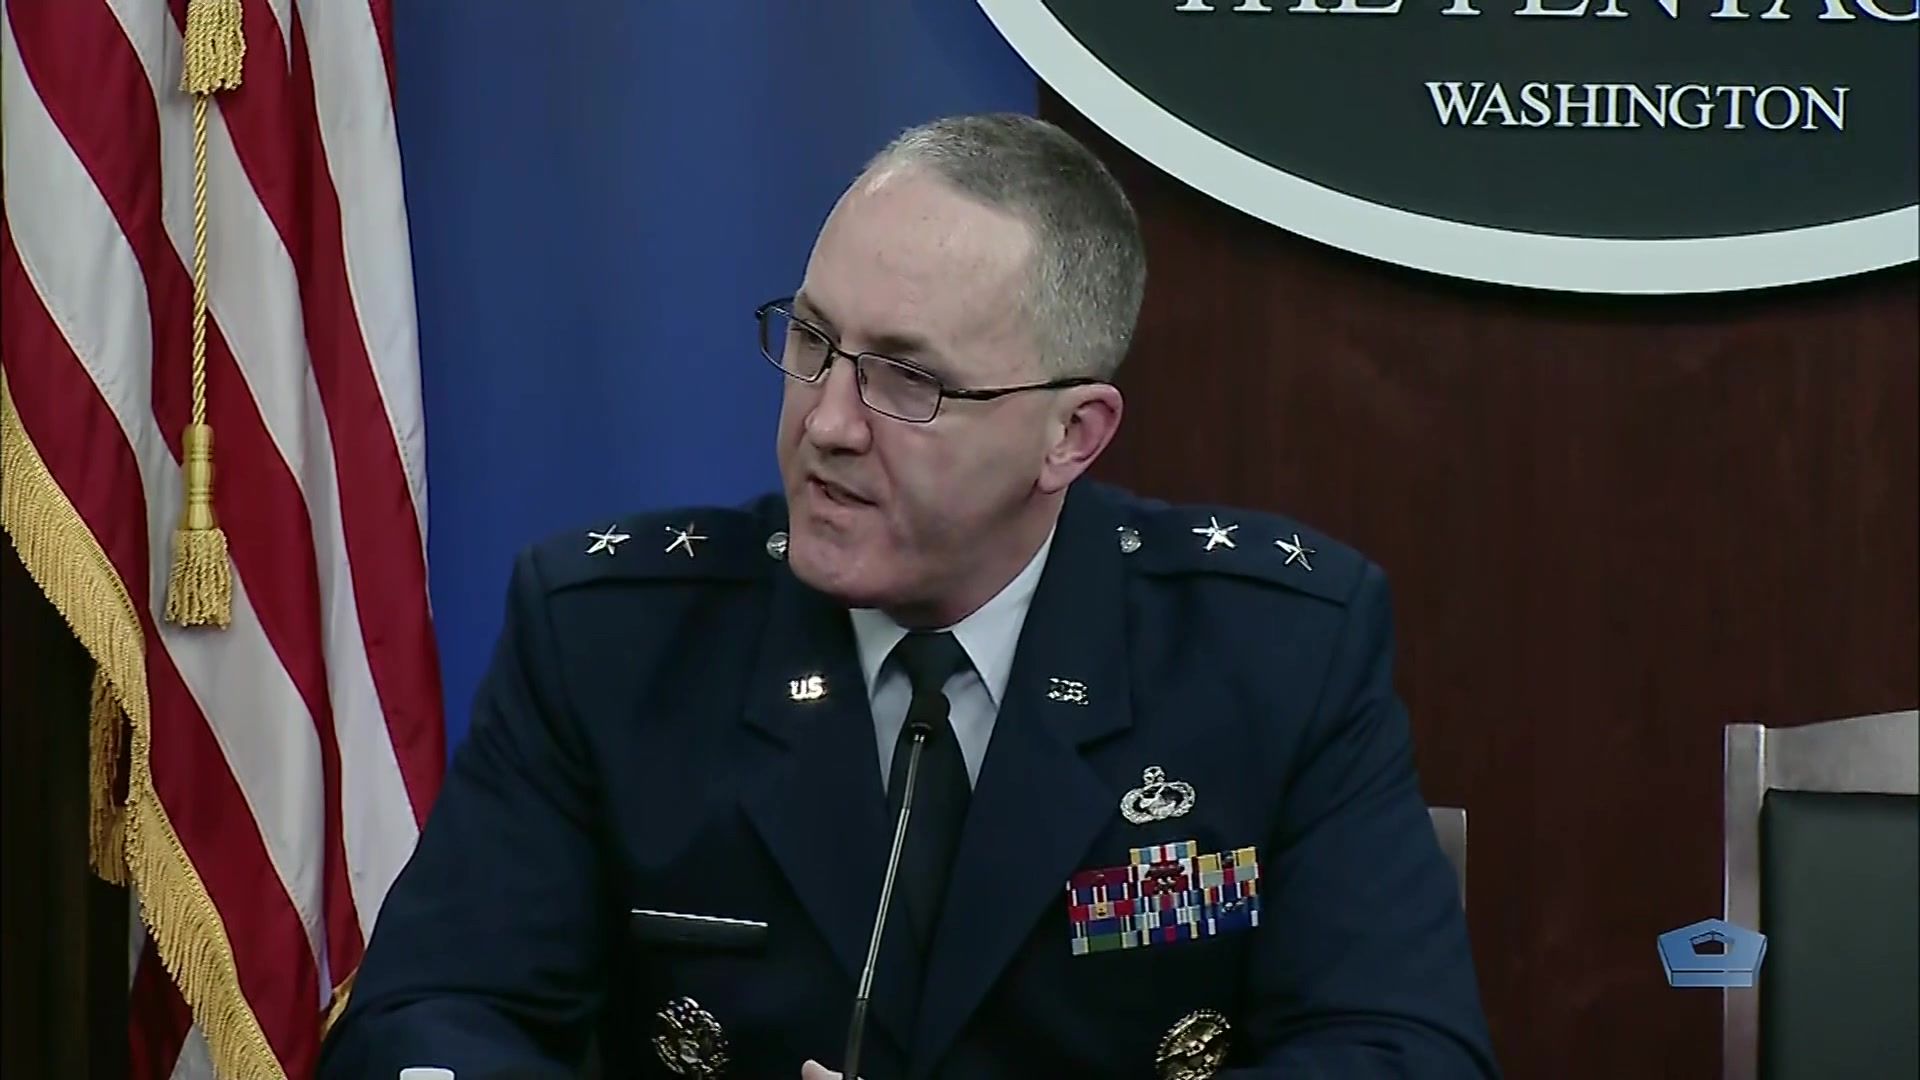 An Air Force general sits and speaks.